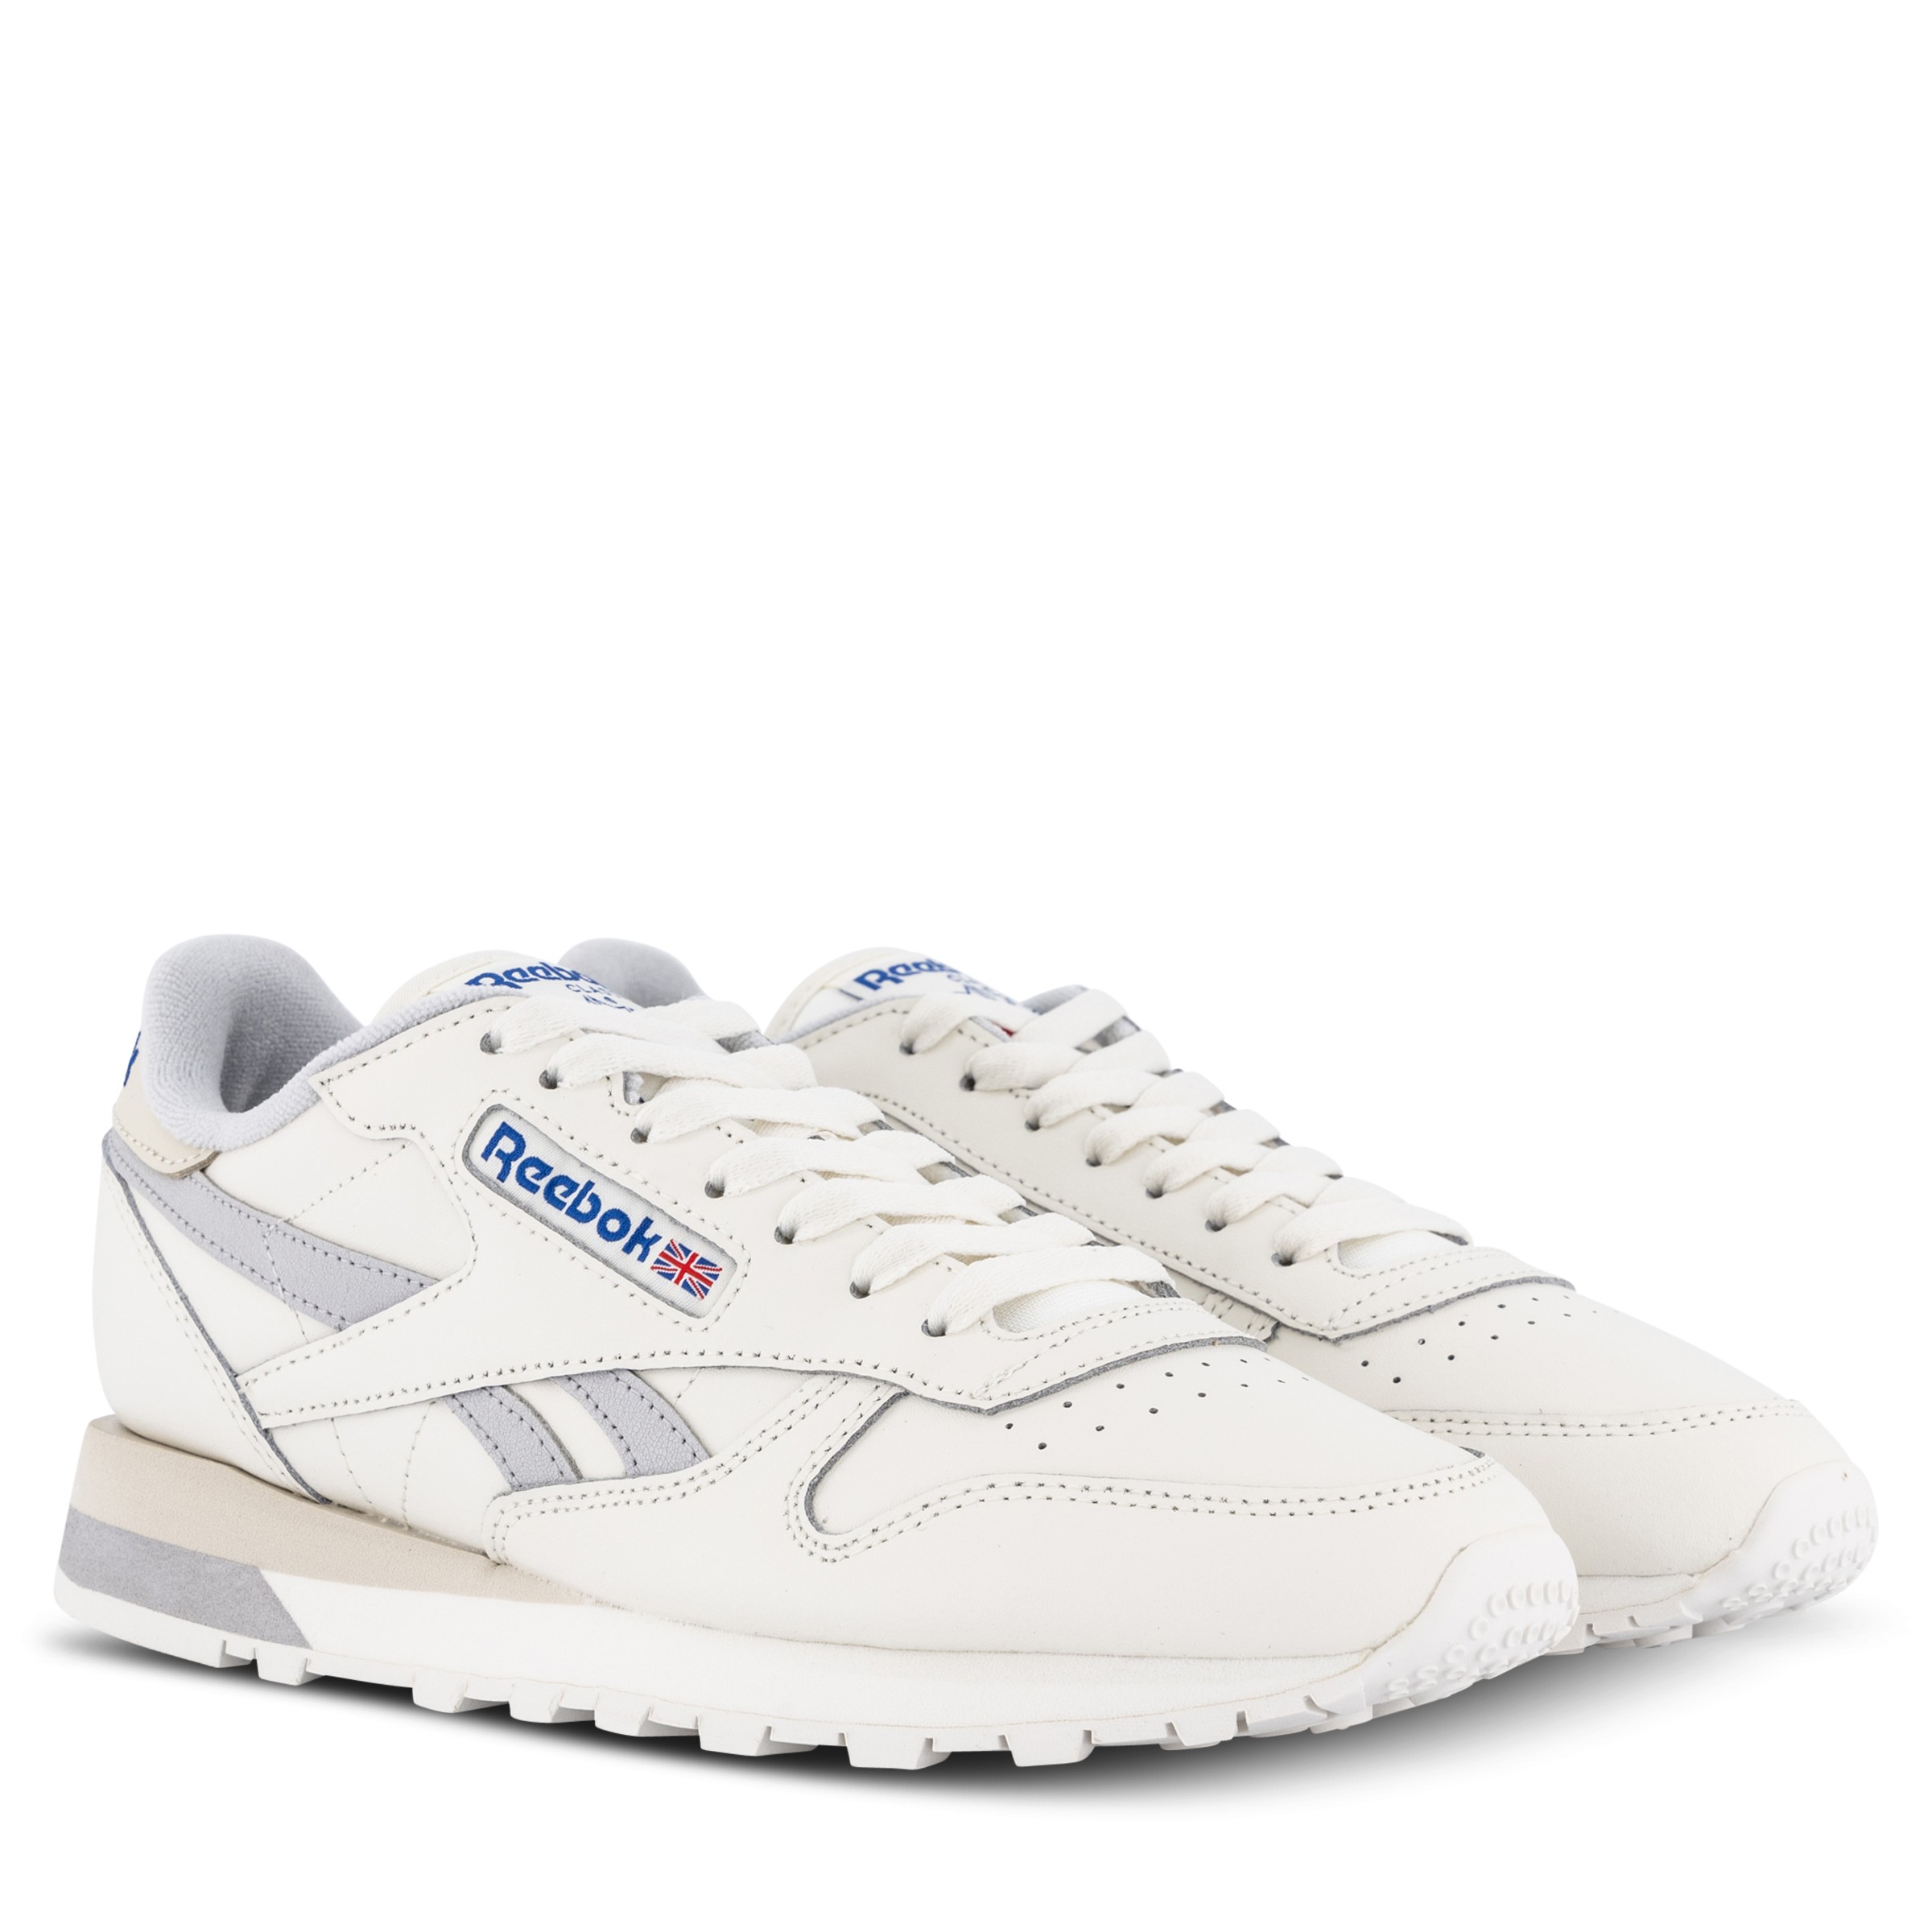 Reebok Classic Leather Chalk/Light Solid Grey/Alabaster | Hype DC